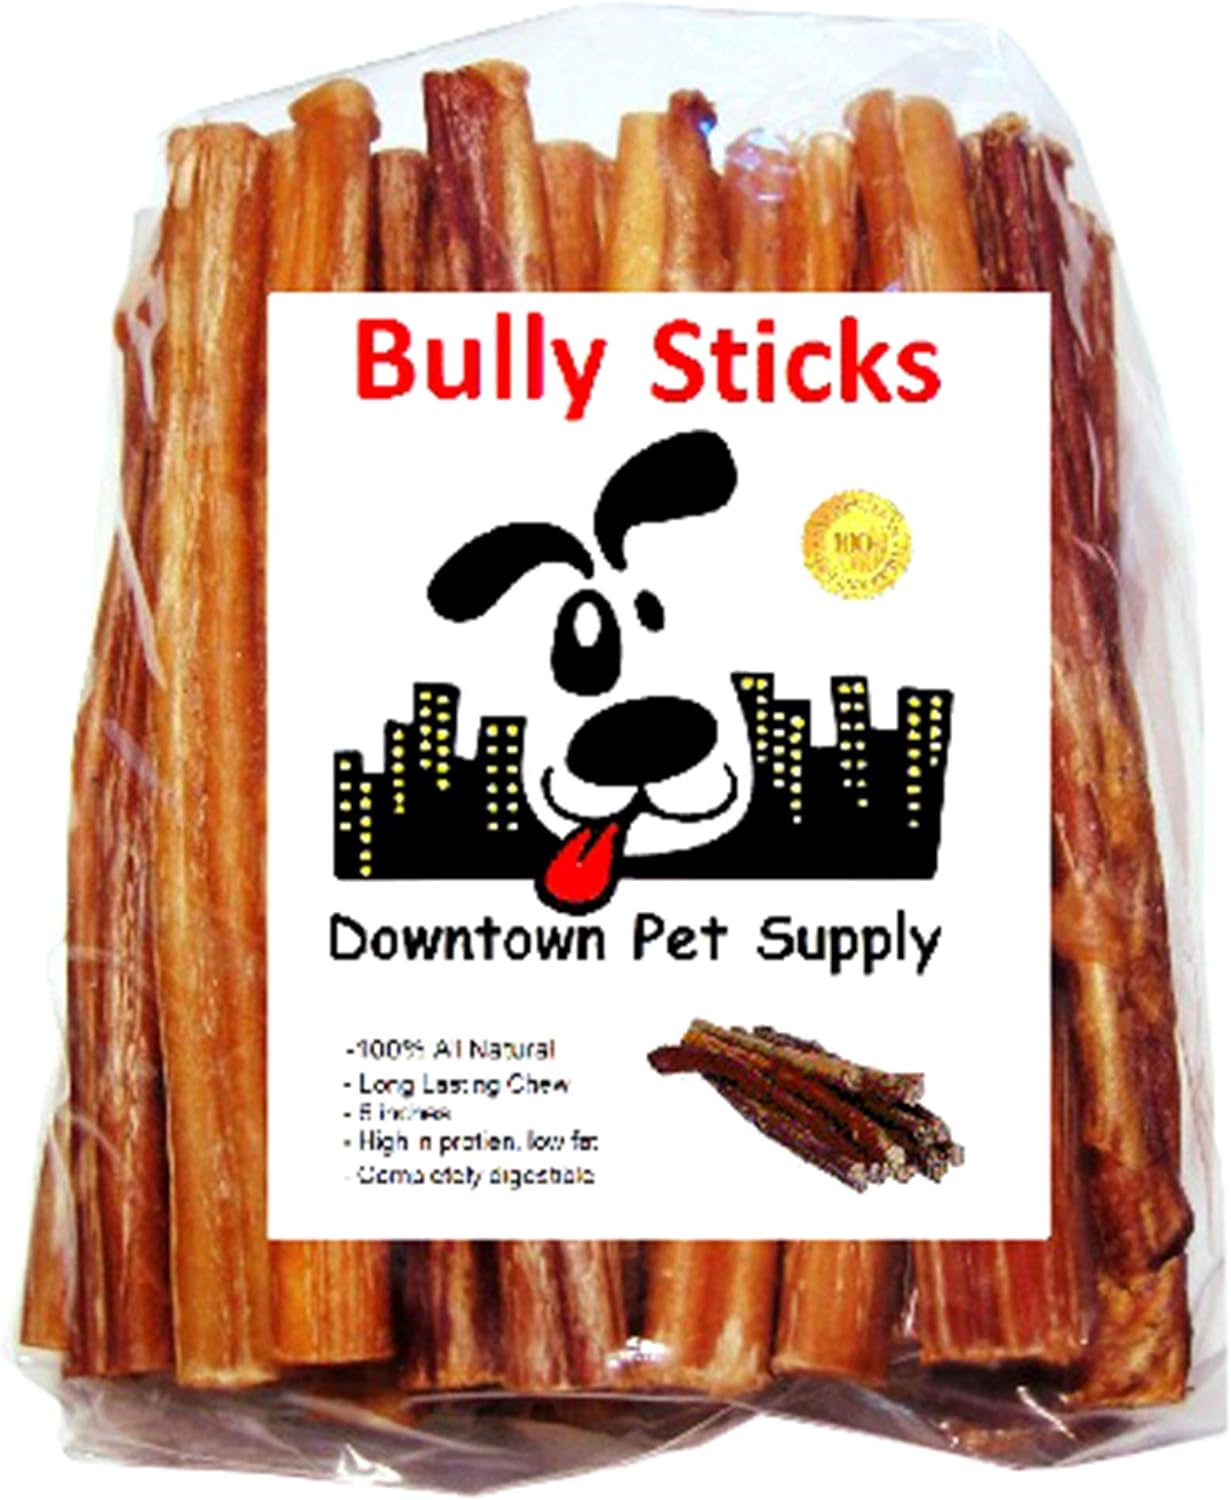 Downtown Pet Supply 6-inch Bully Sticks for Dogs, Pack of 48 - Single Ingredient, Nutrient-Rich and Odor Free Bully Sticks for Dogs - Rawhide Free Dog Chews Long Lasting and Non-Splintering